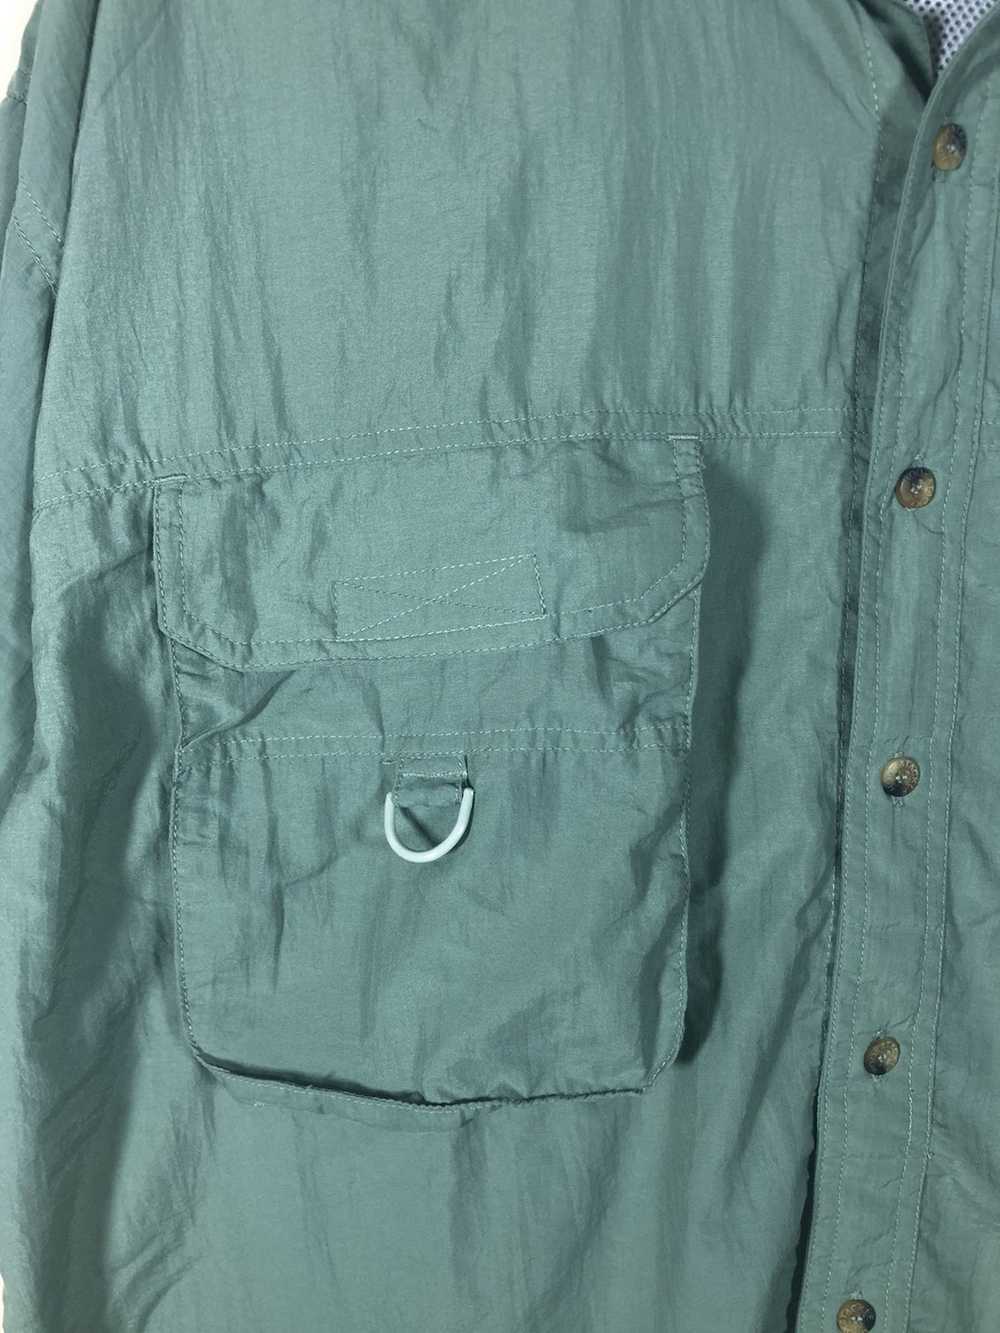 Japanese Brand Hook and tackle fishing shirt butt… - image 4